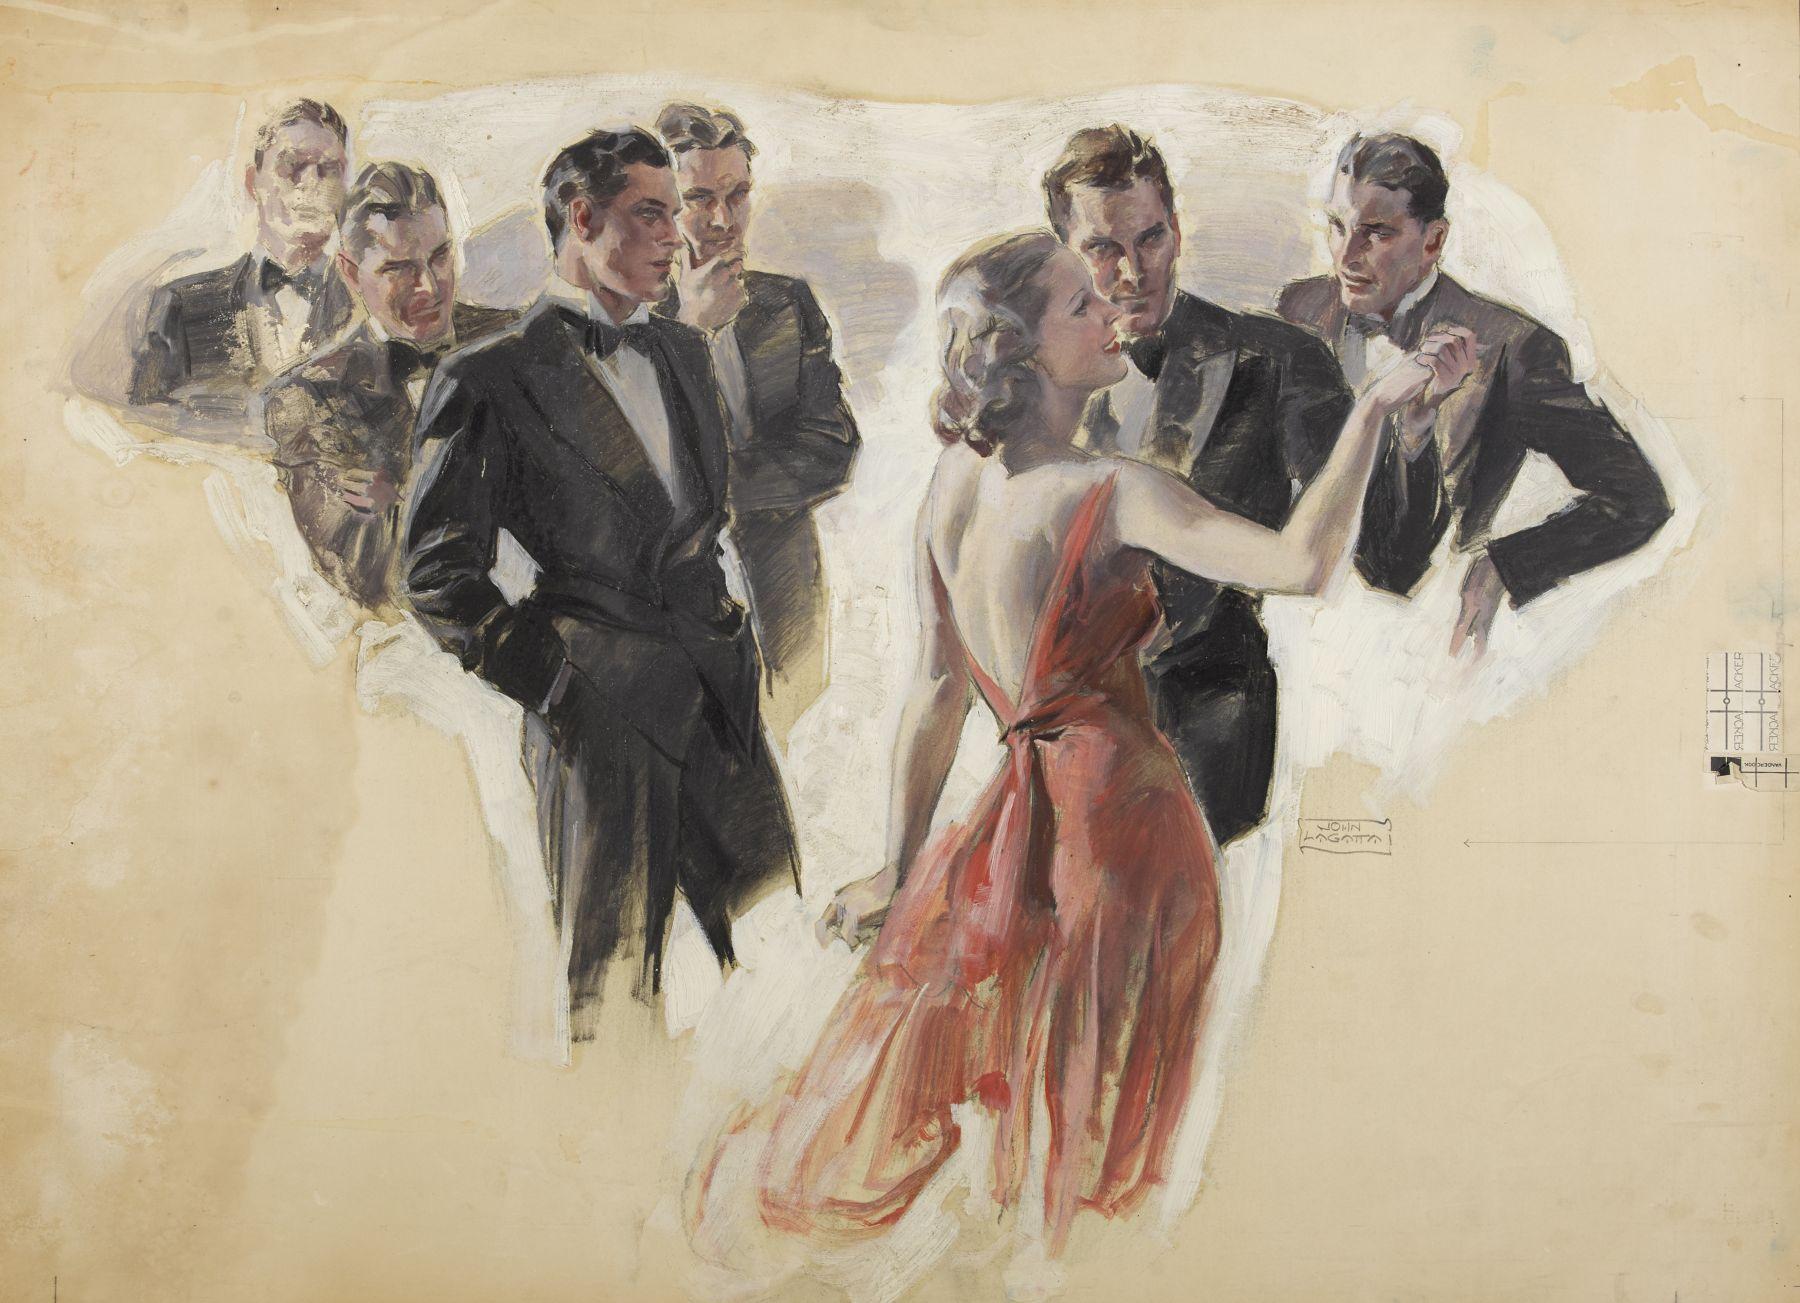 A Woman in Red Dress Dancing Among a Number of Tuxedoed Men